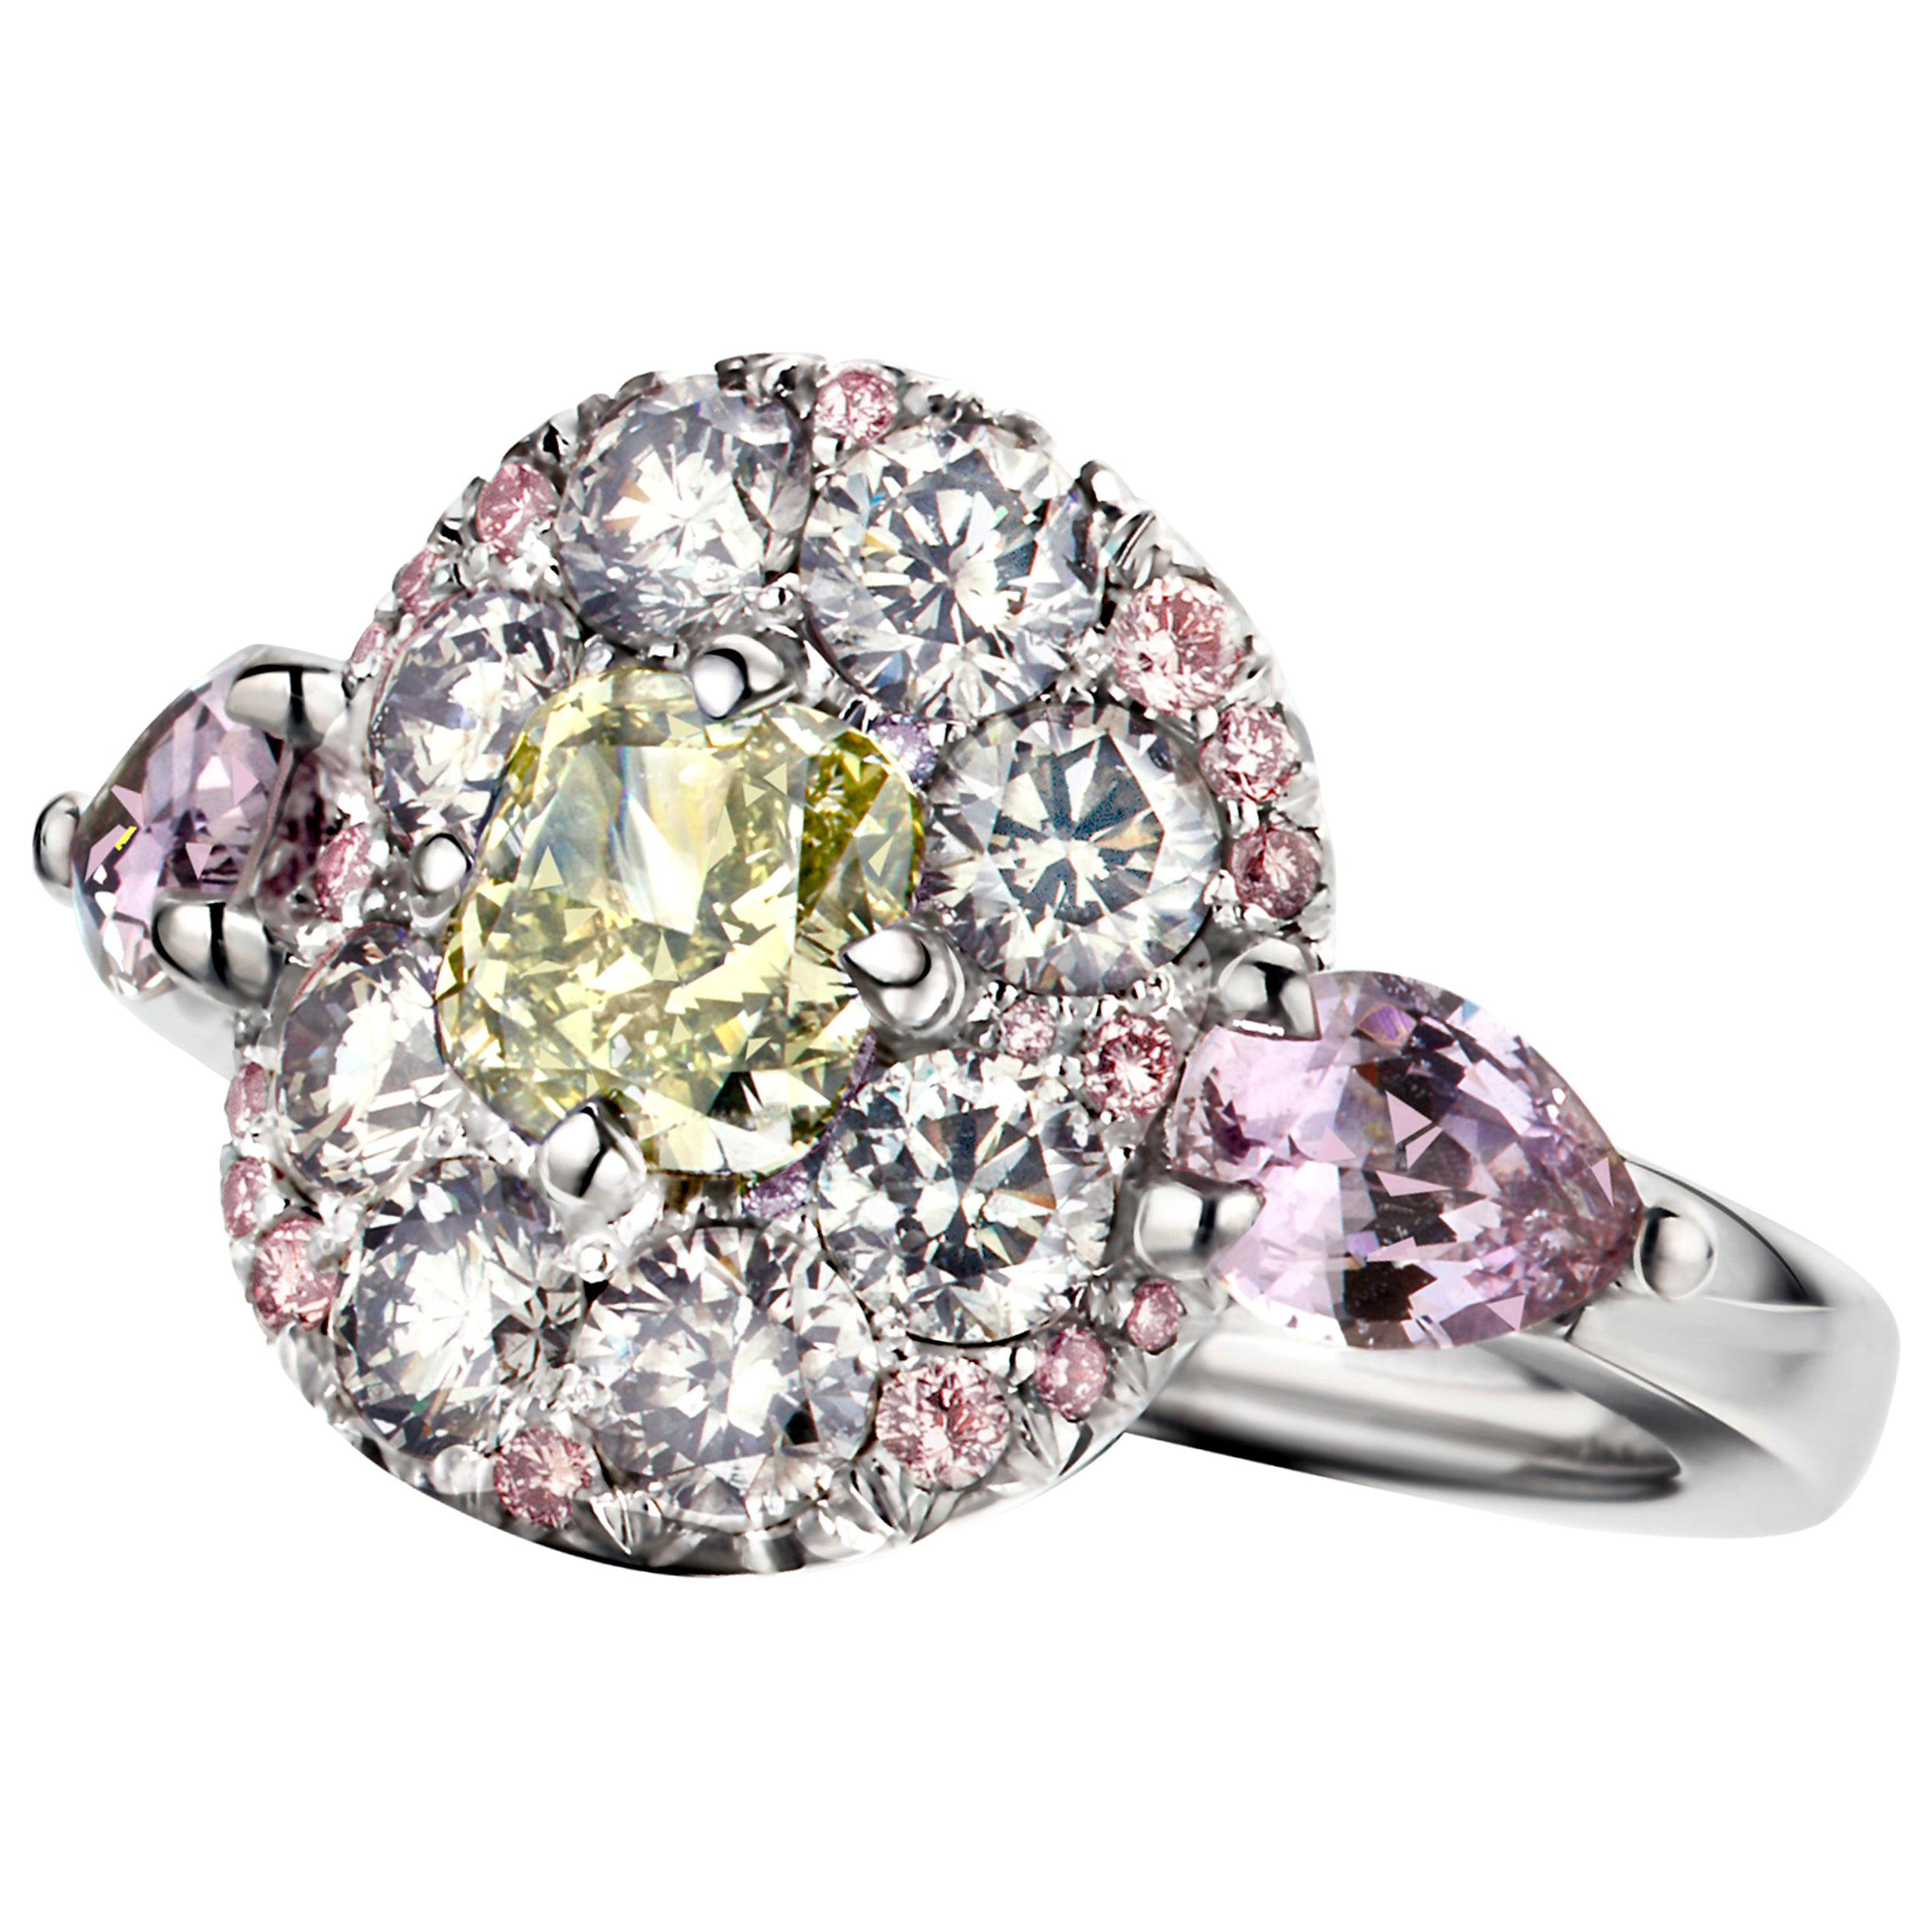 1.02 Carat Fancy Green, Grey, Pink Diamond, Unheated Violet Sapphire Pave Ring